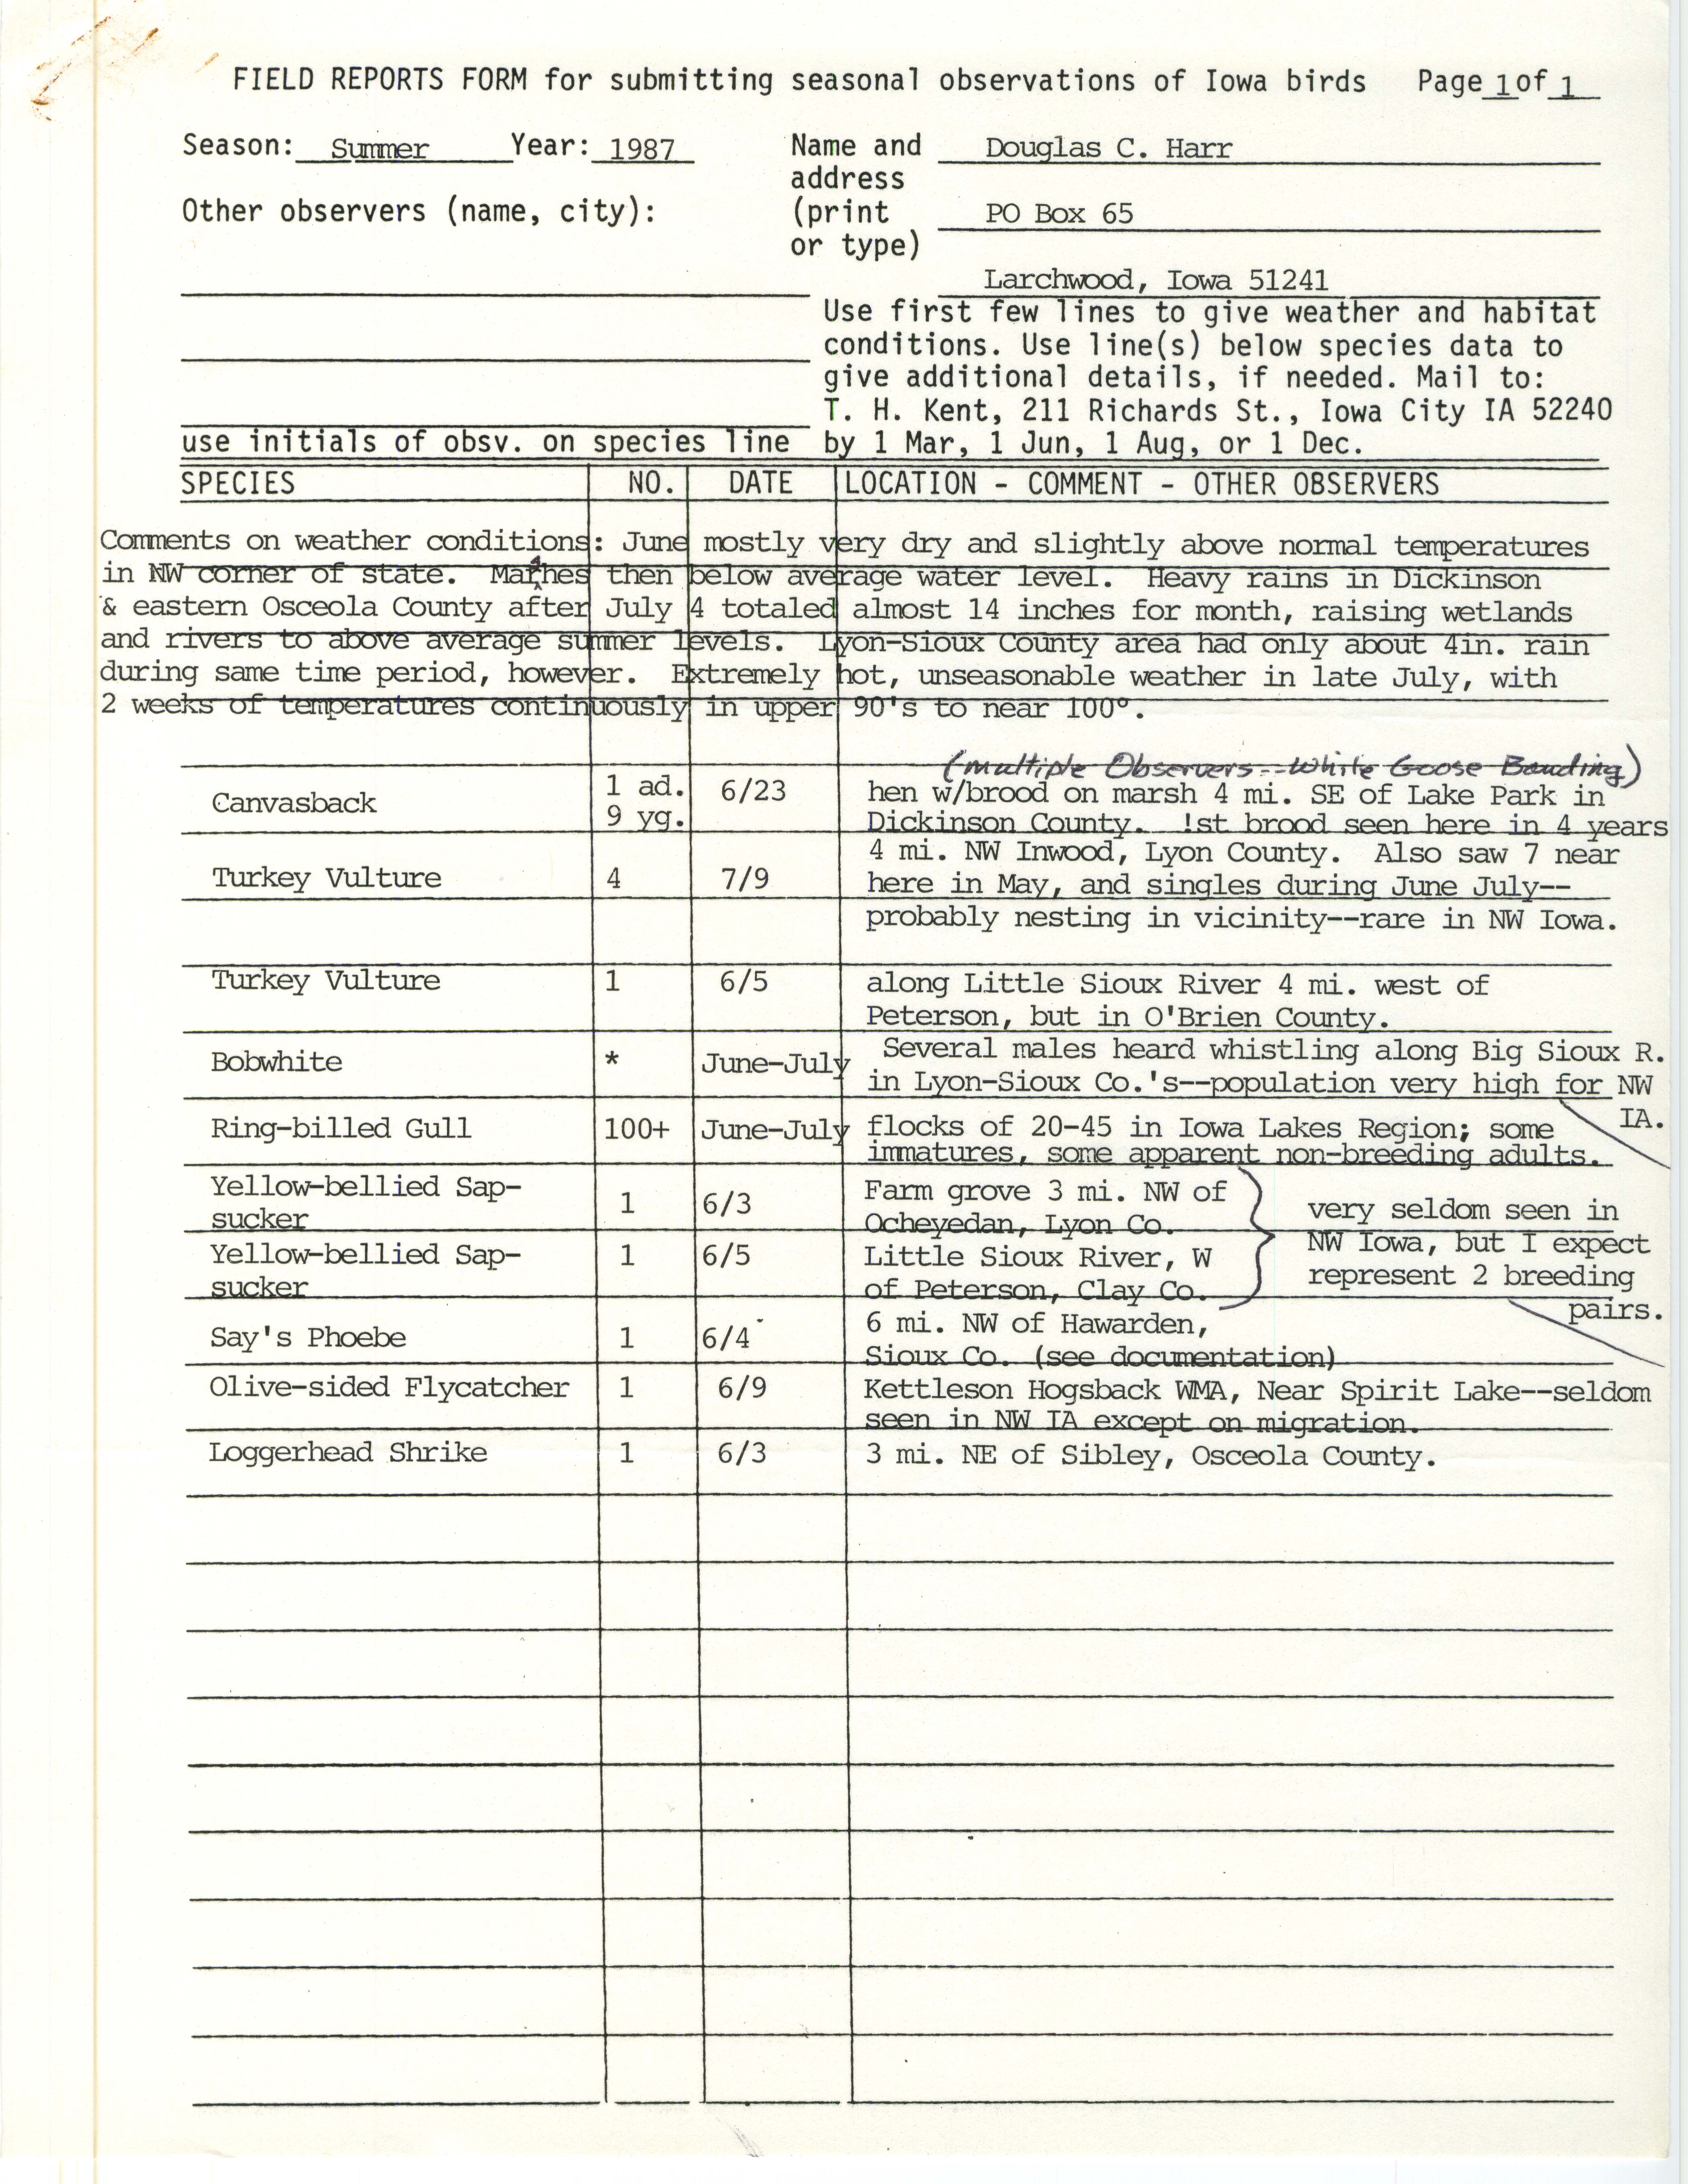 Field reports form for submitting seasonal observations of Iowa birds, Douglas C. Harr, summer 1987